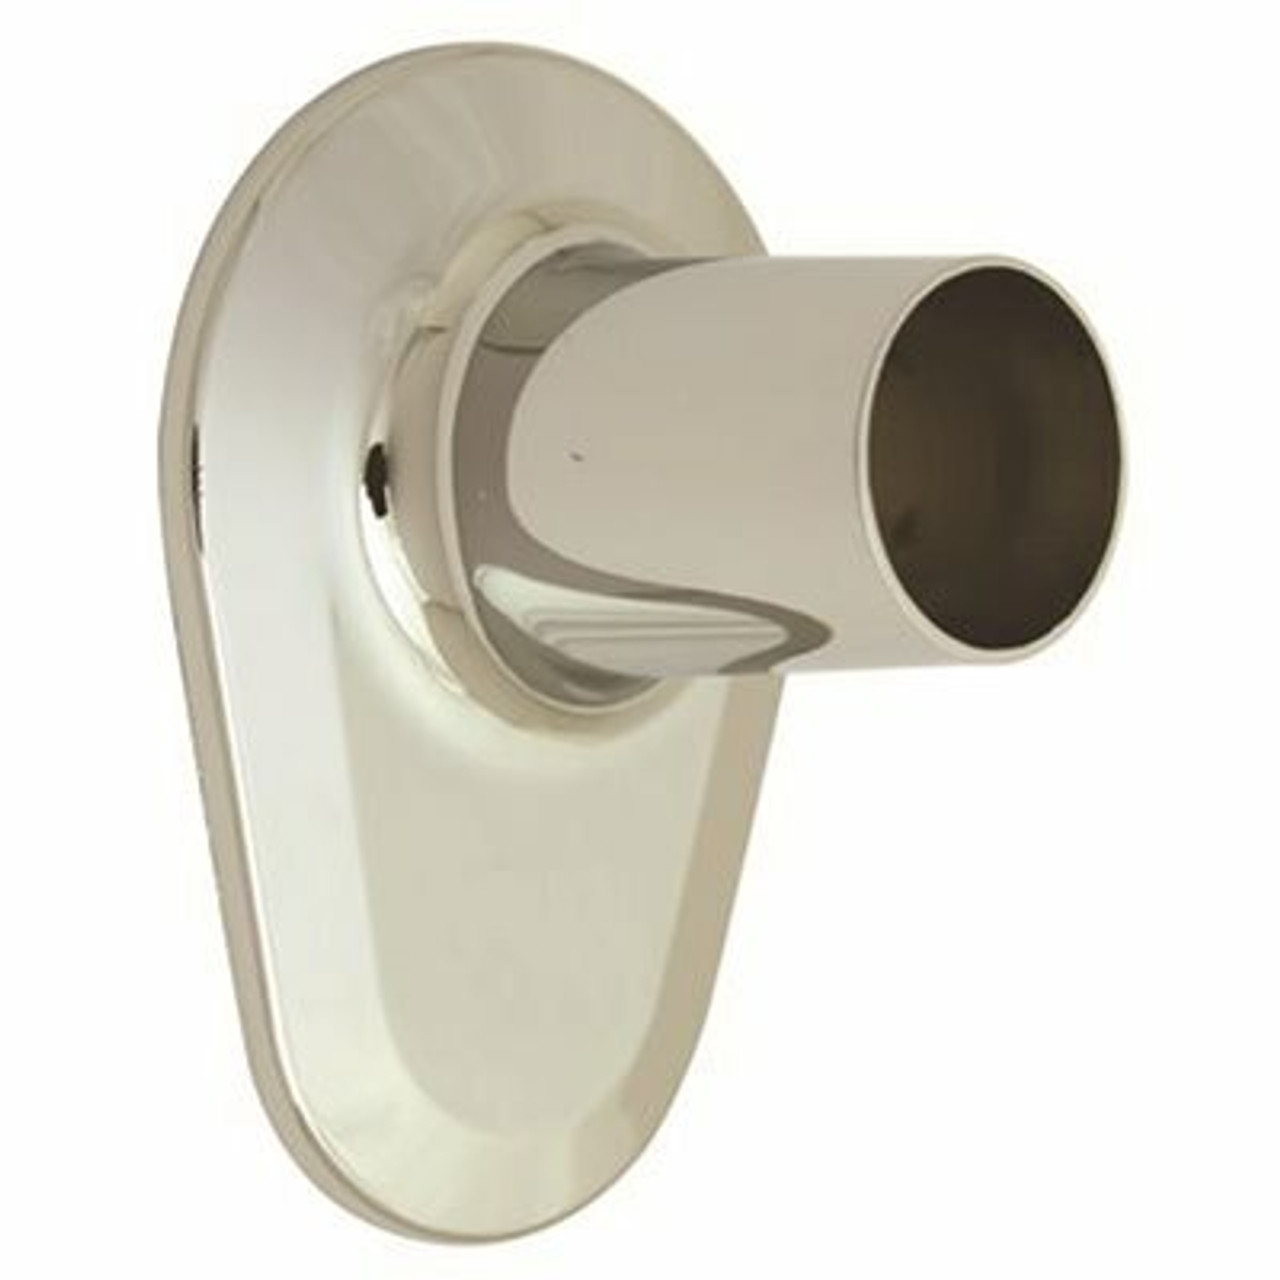 Proplus 4 In. X 2 In. Escutcheon For Price Pfister Verve And Windsor